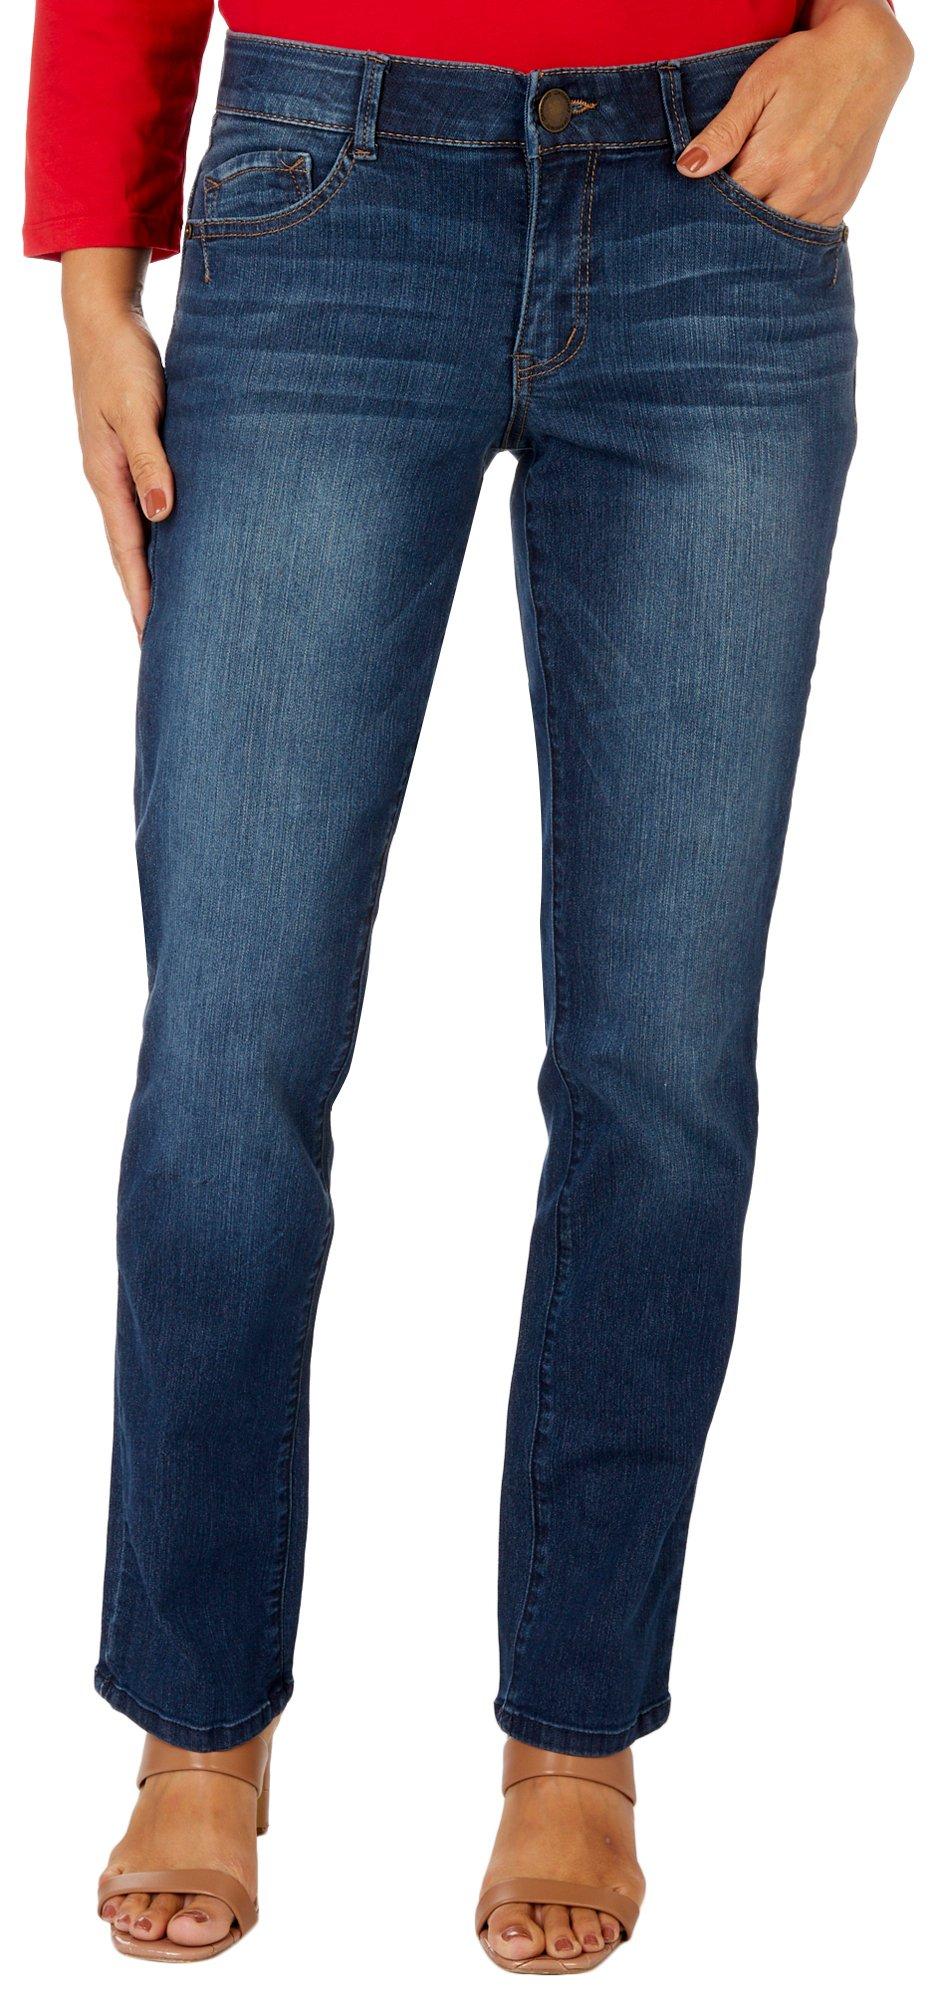 Jeans for Women, Skinny, Ankle, Bootcut, Straight Styles